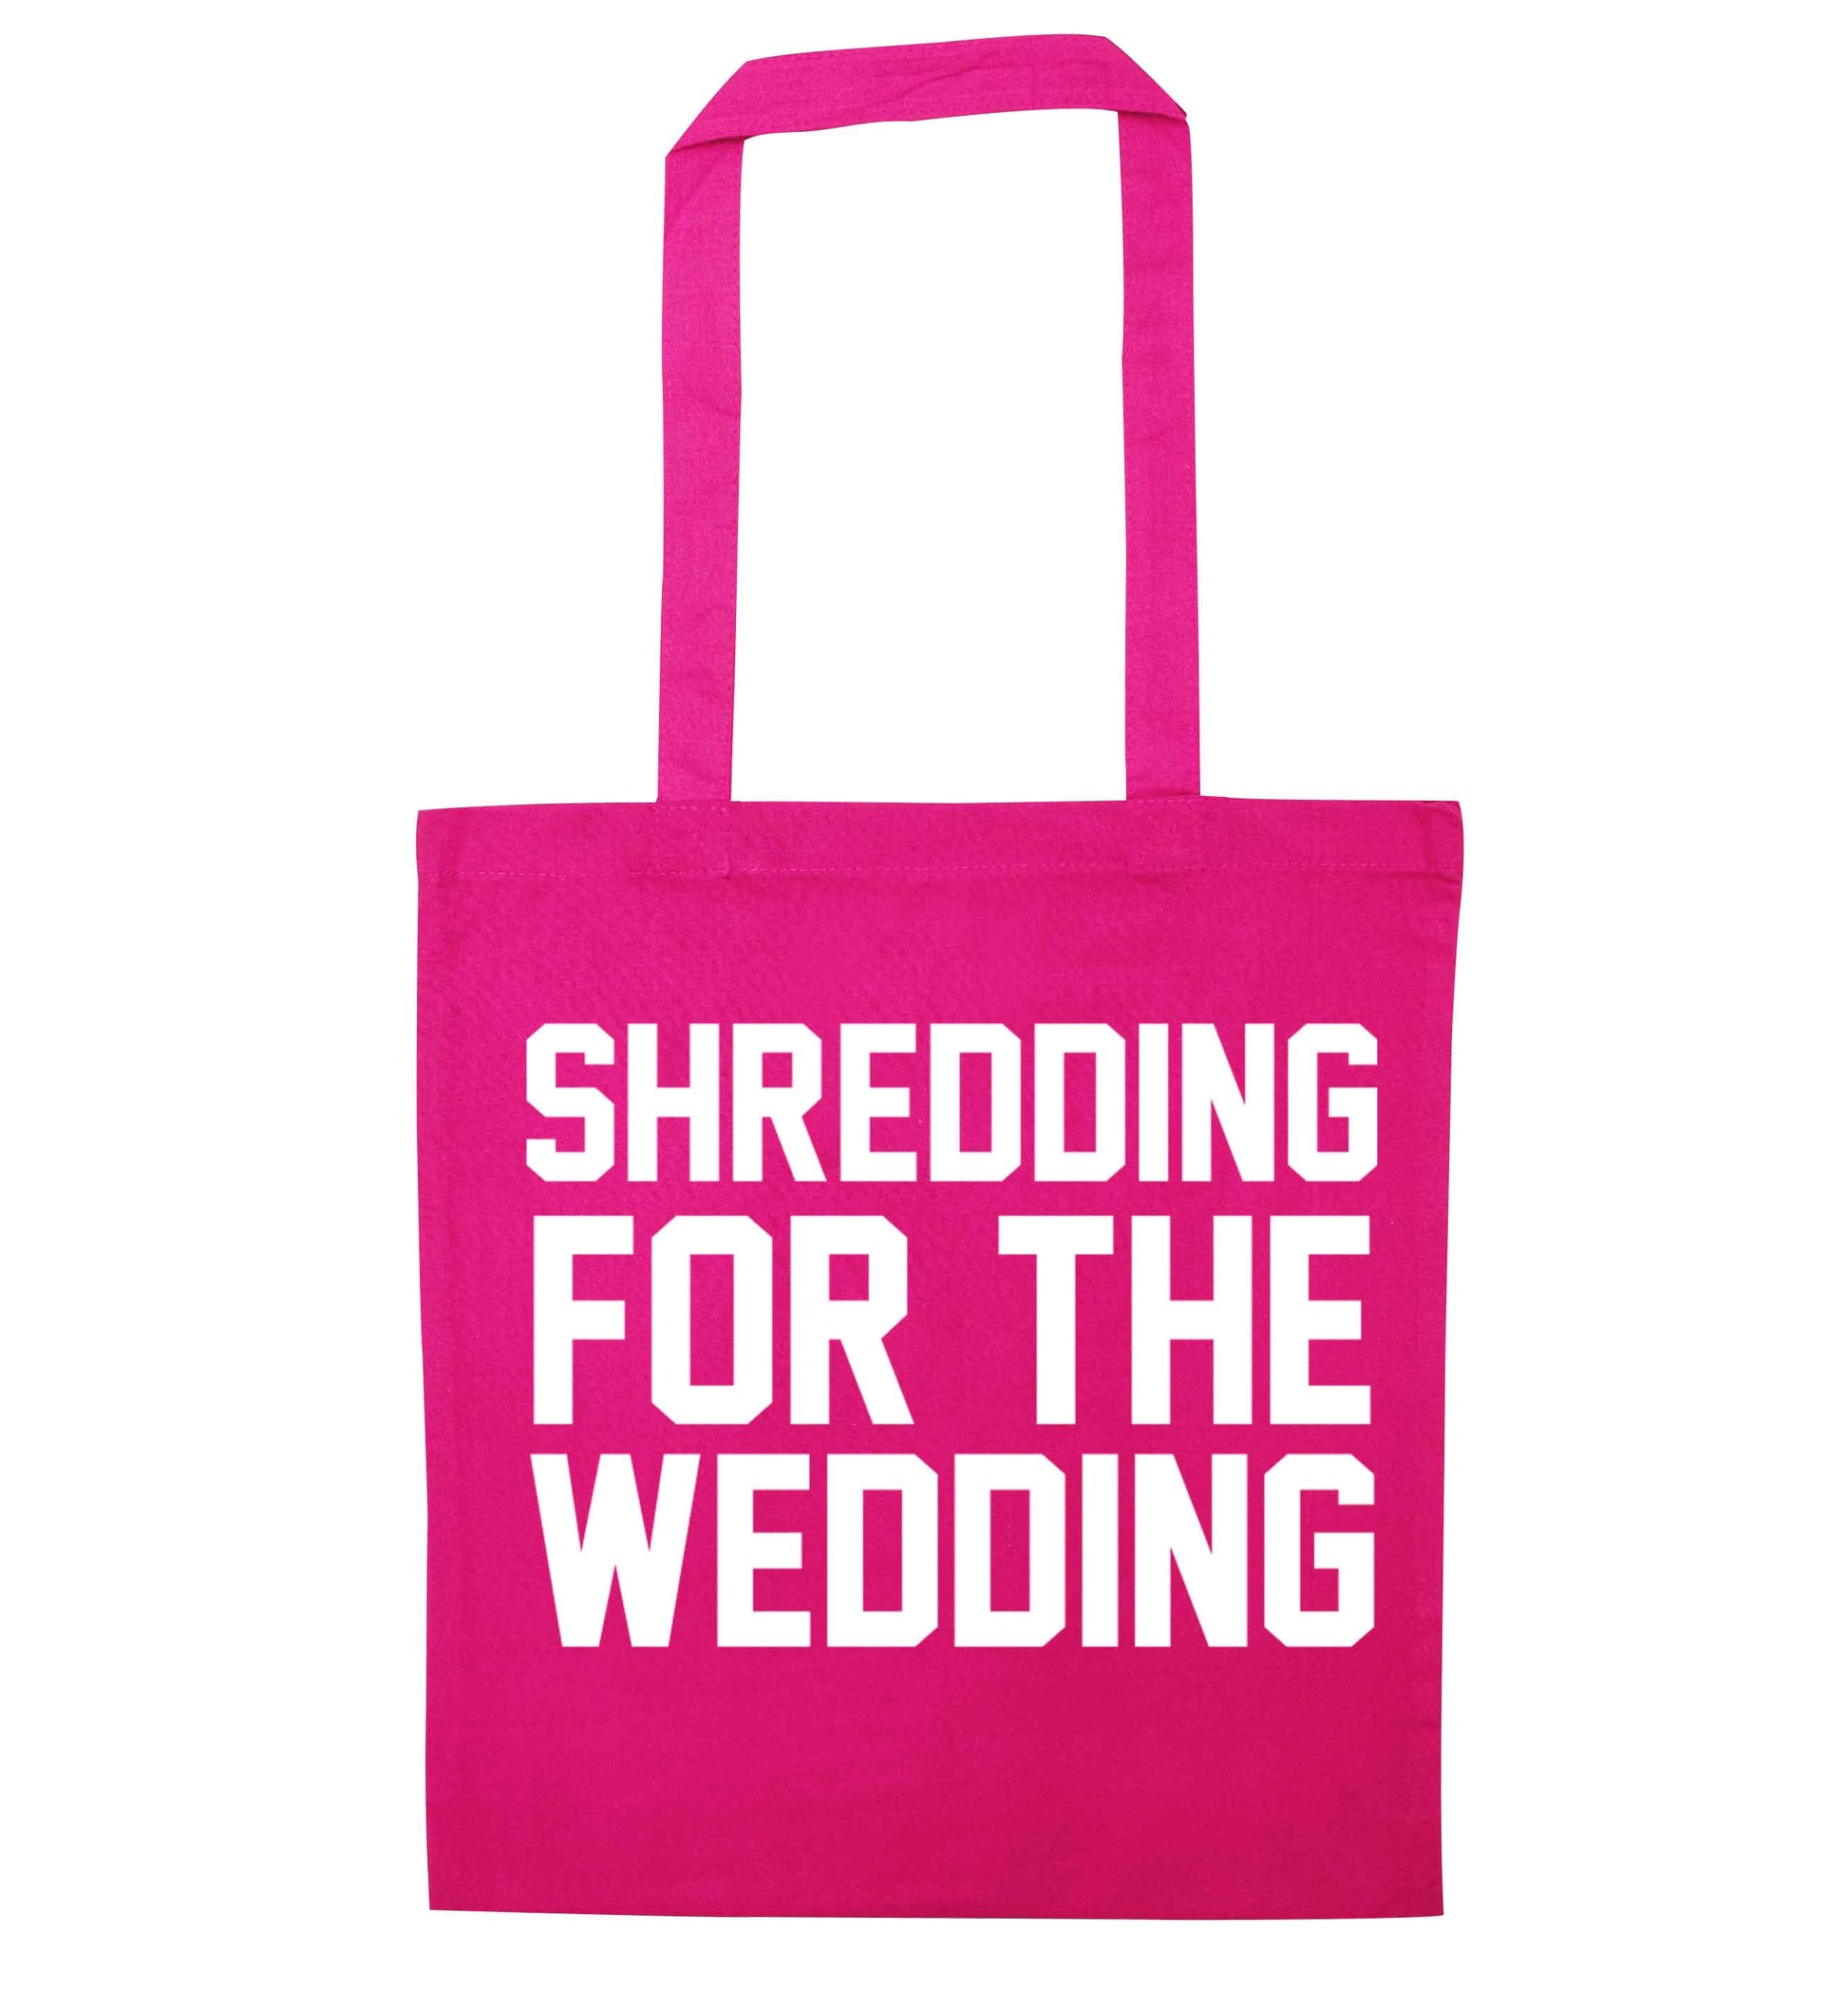 Get motivated and get fit for your big day! Our workout quotes and designs will get you ready to sweat! Perfect for any bride, groom or bridesmaid to be!  pink tote bag